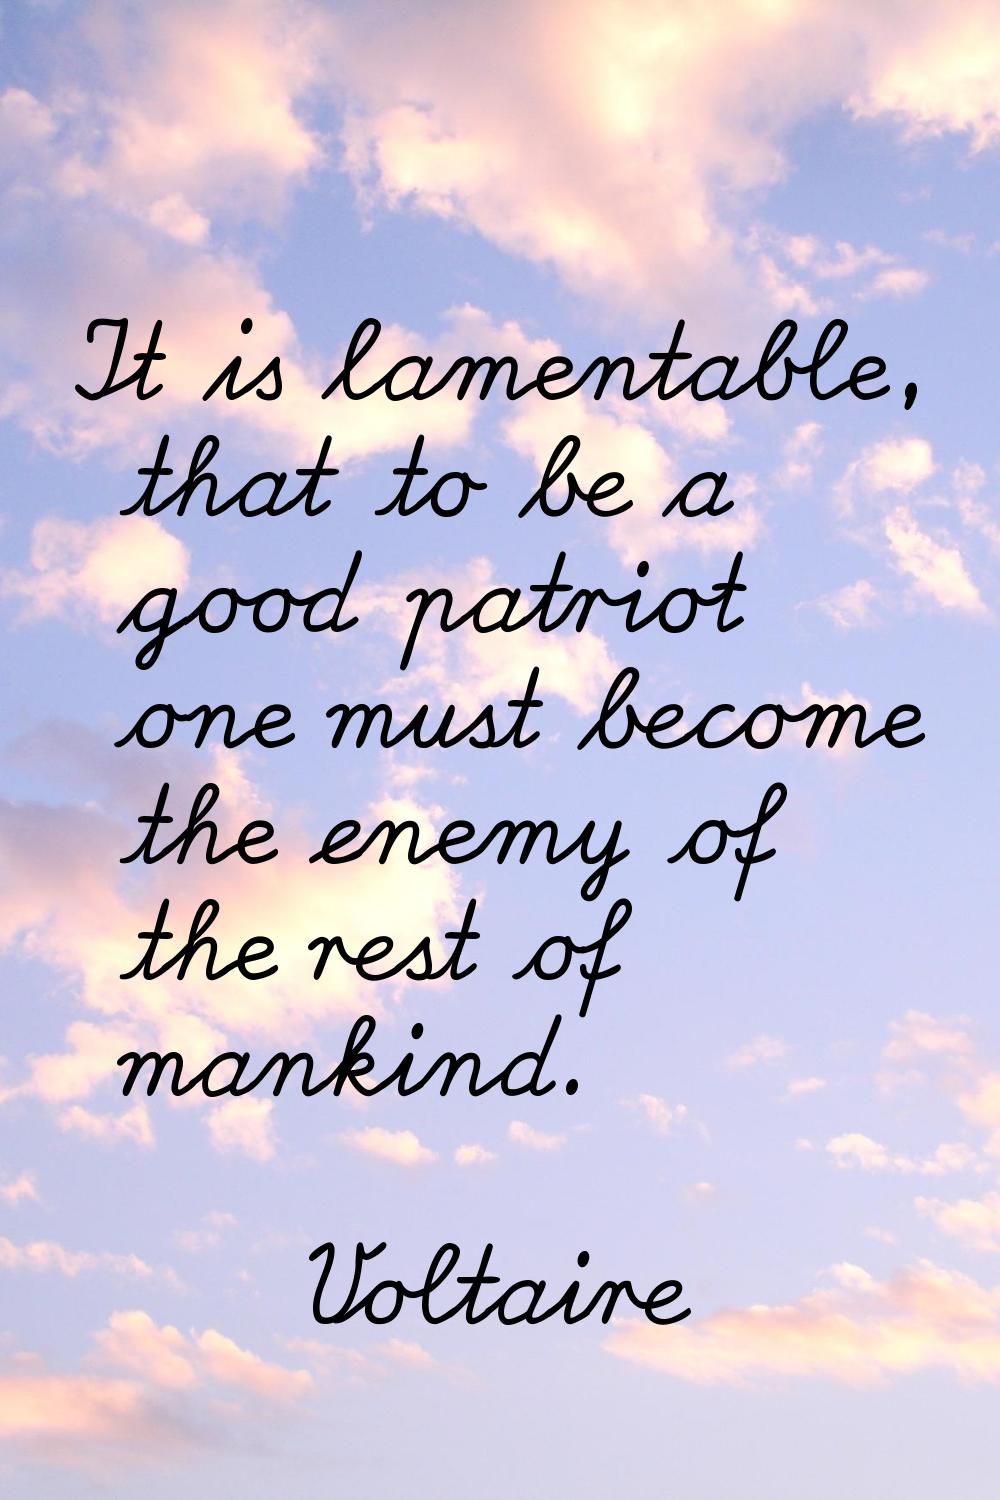 It is lamentable, that to be a good patriot one must become the enemy of the rest of mankind.